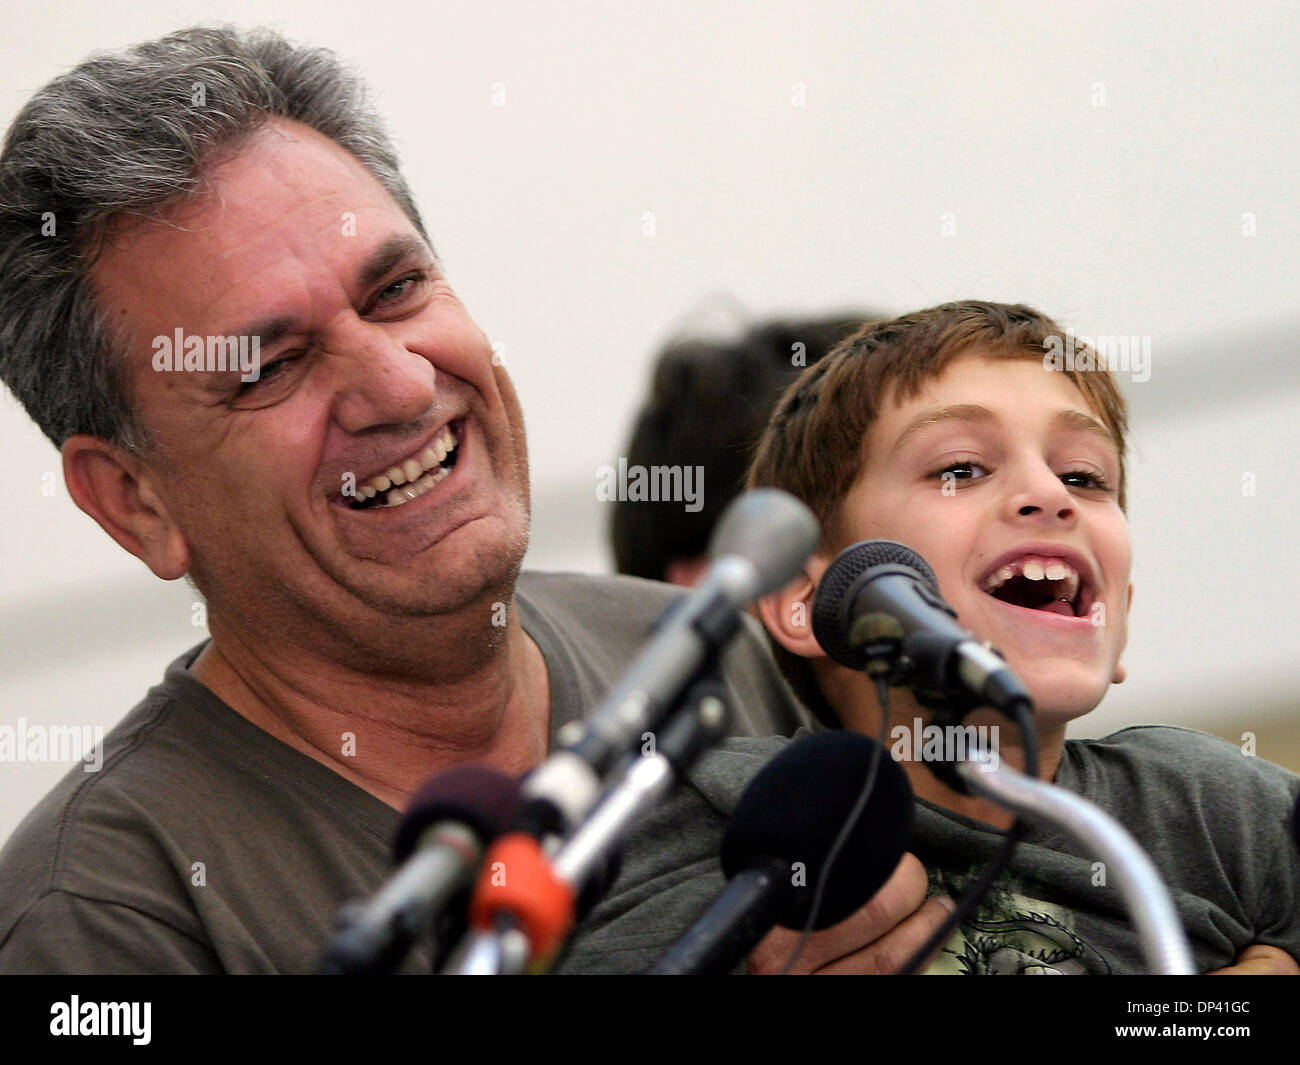 Jul 20, 2006; Baltimore, Maryland, USA; TOM CHARARA and his son ALI speak to the press about his experience fleeing Lebanon where the Israeli - Hezbollah conflict continues to intensify. The first flight of American refugees from Lebanon arrived at BWI Airport (Baltimore/Washington) this morning. Most were American citizens visiting Lebanon at the time of the most recent attacks by Stock Photo